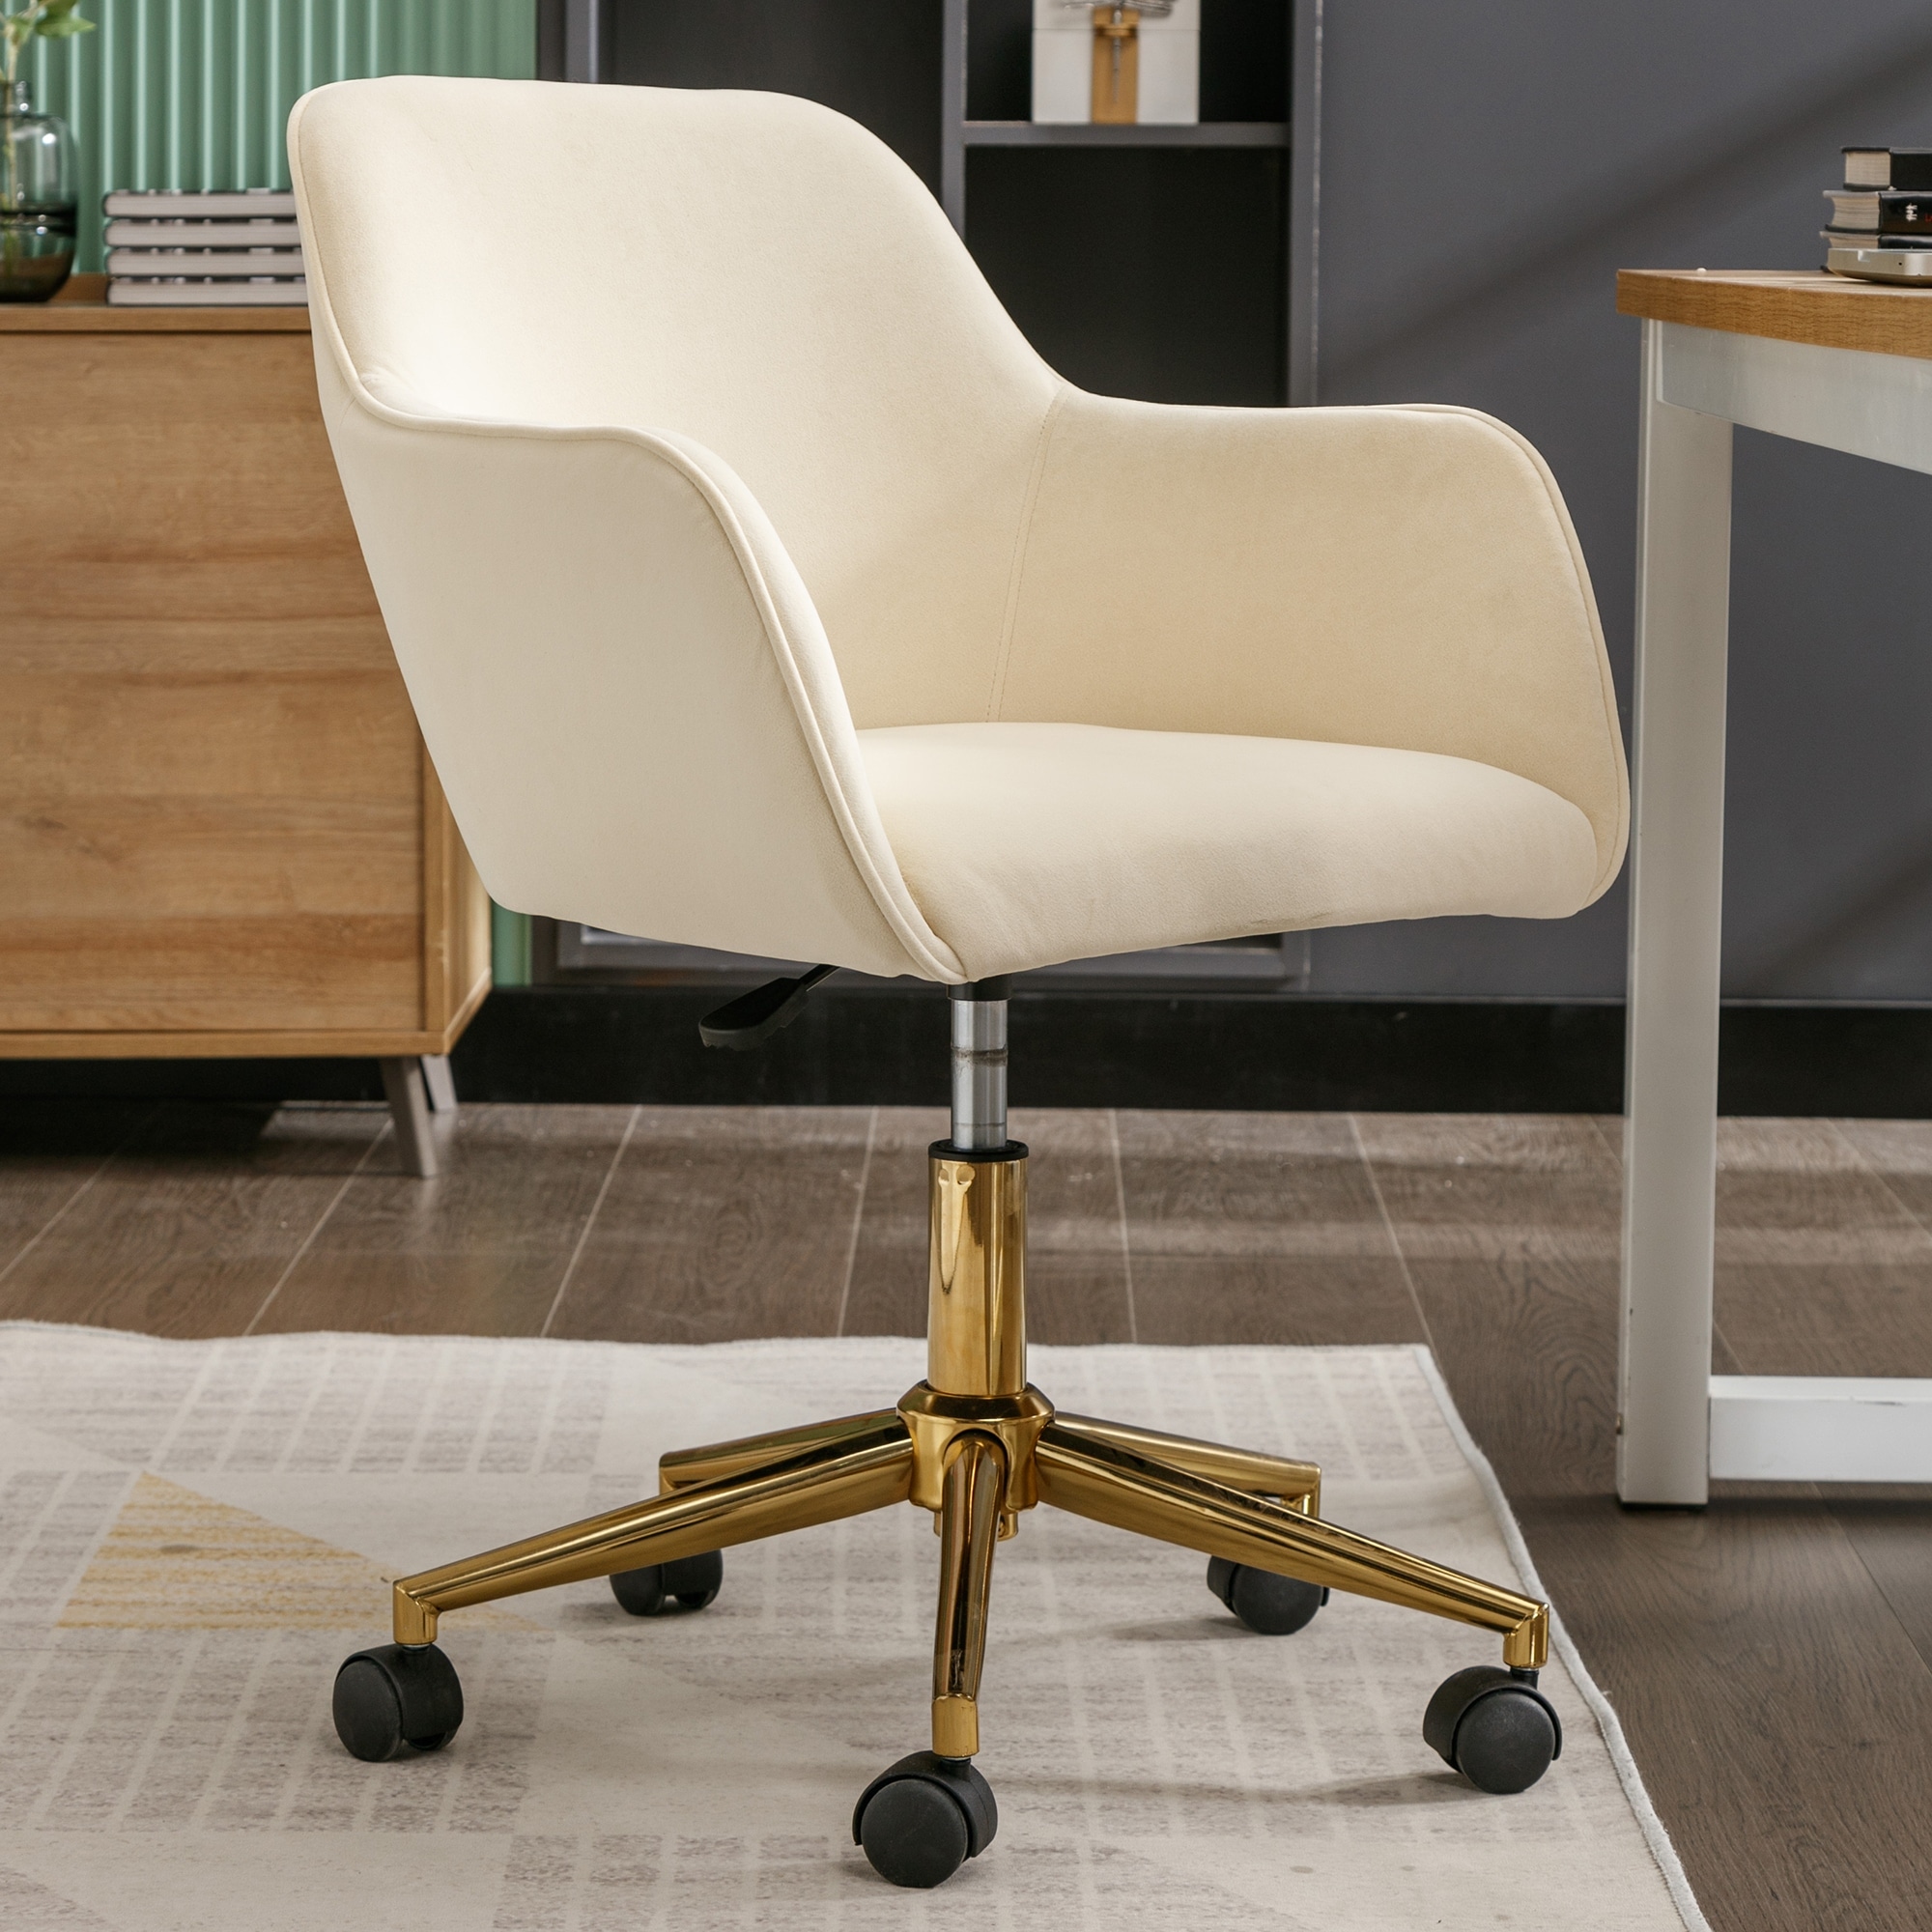  Swivel Chair Velvet Desk Chair with Adjustable Swivel Wheels  Upholstered Home Office Chair with Gold Metal Legs Ergonomic Office Chair  for Living Room, Bedroom, Office, Dresser and Study (Gray) : Home